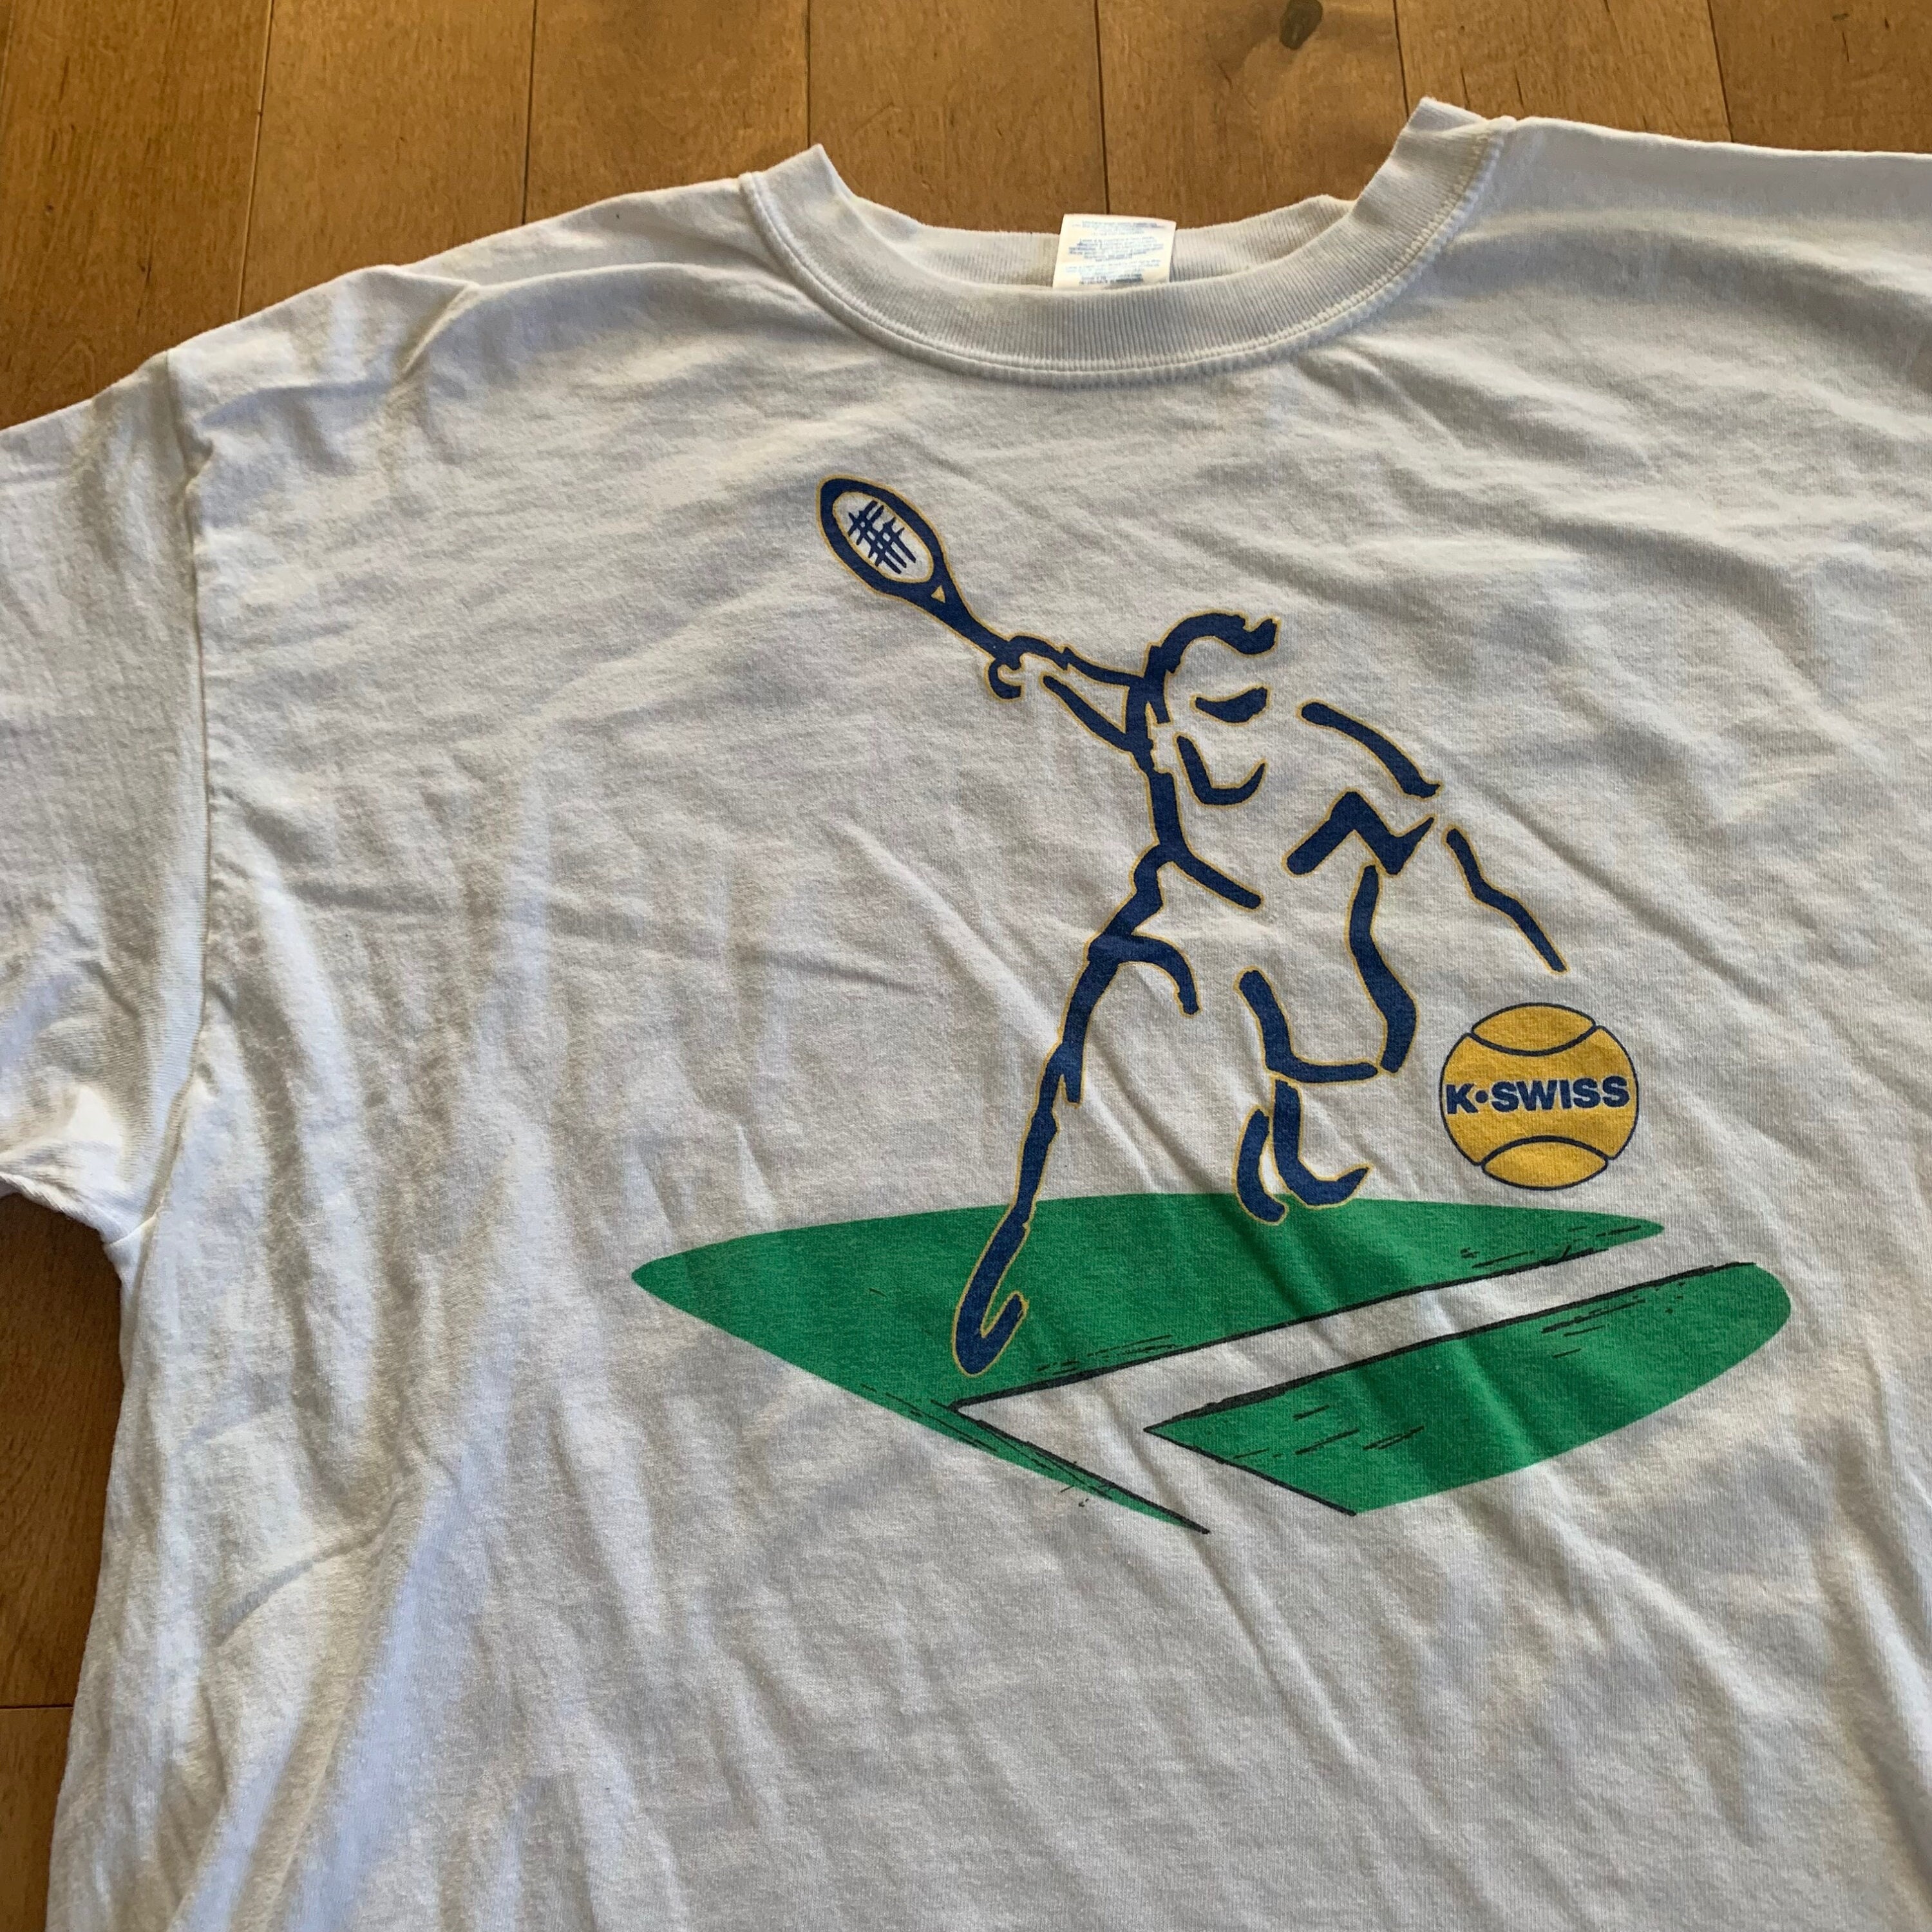 Late 90s Early 2000s K-swiss Tennis T-shirt Vintage 1990s - Etsy